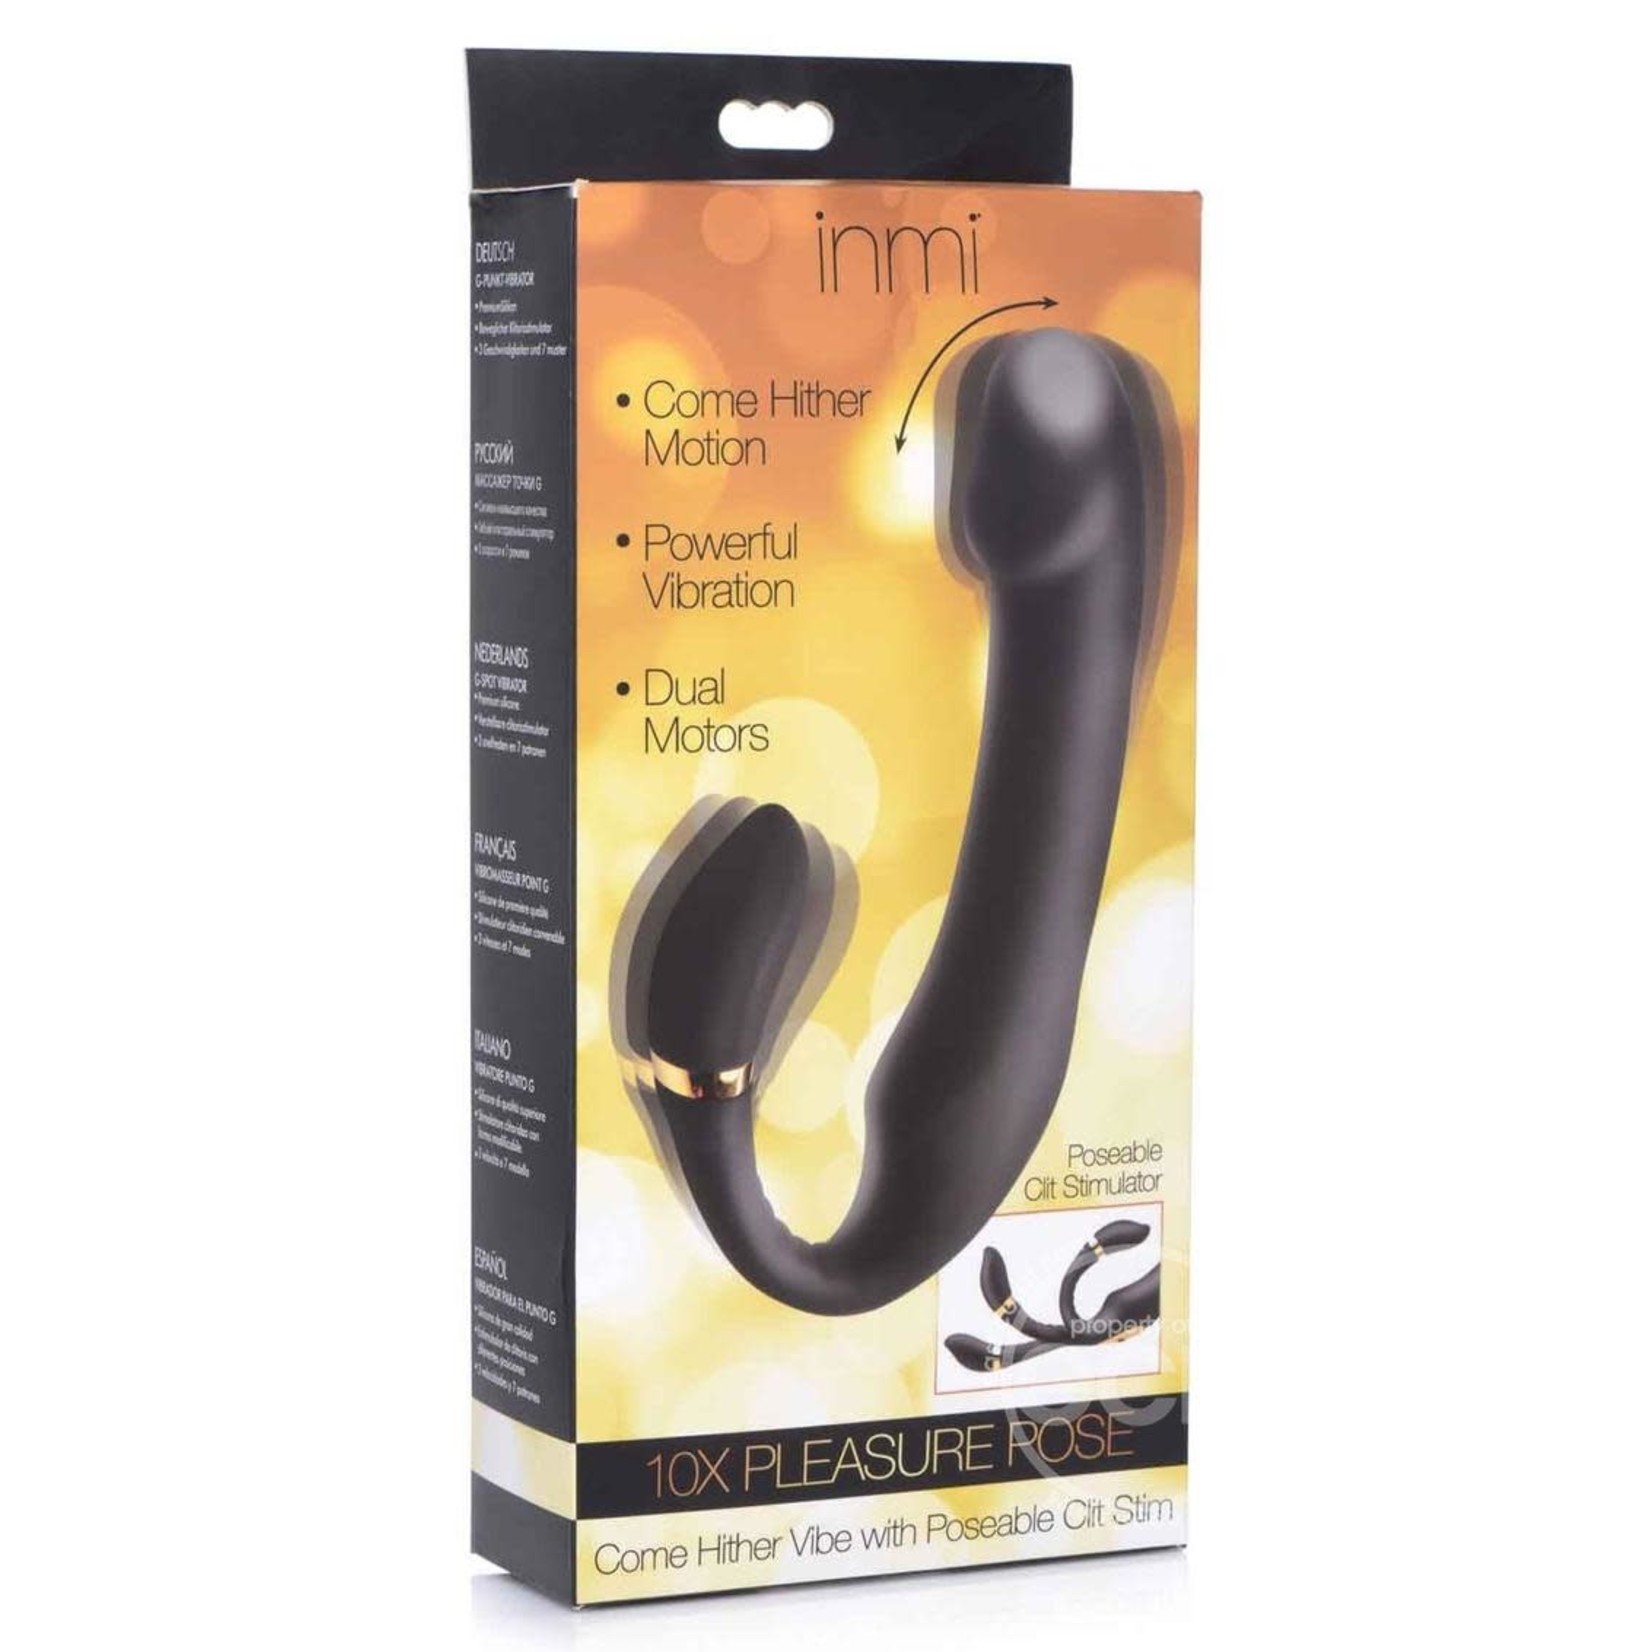 Inmi 10x Pleaure Pose Vibe With Clit Stimulator Silicone Rechargeable Vibrator - Black